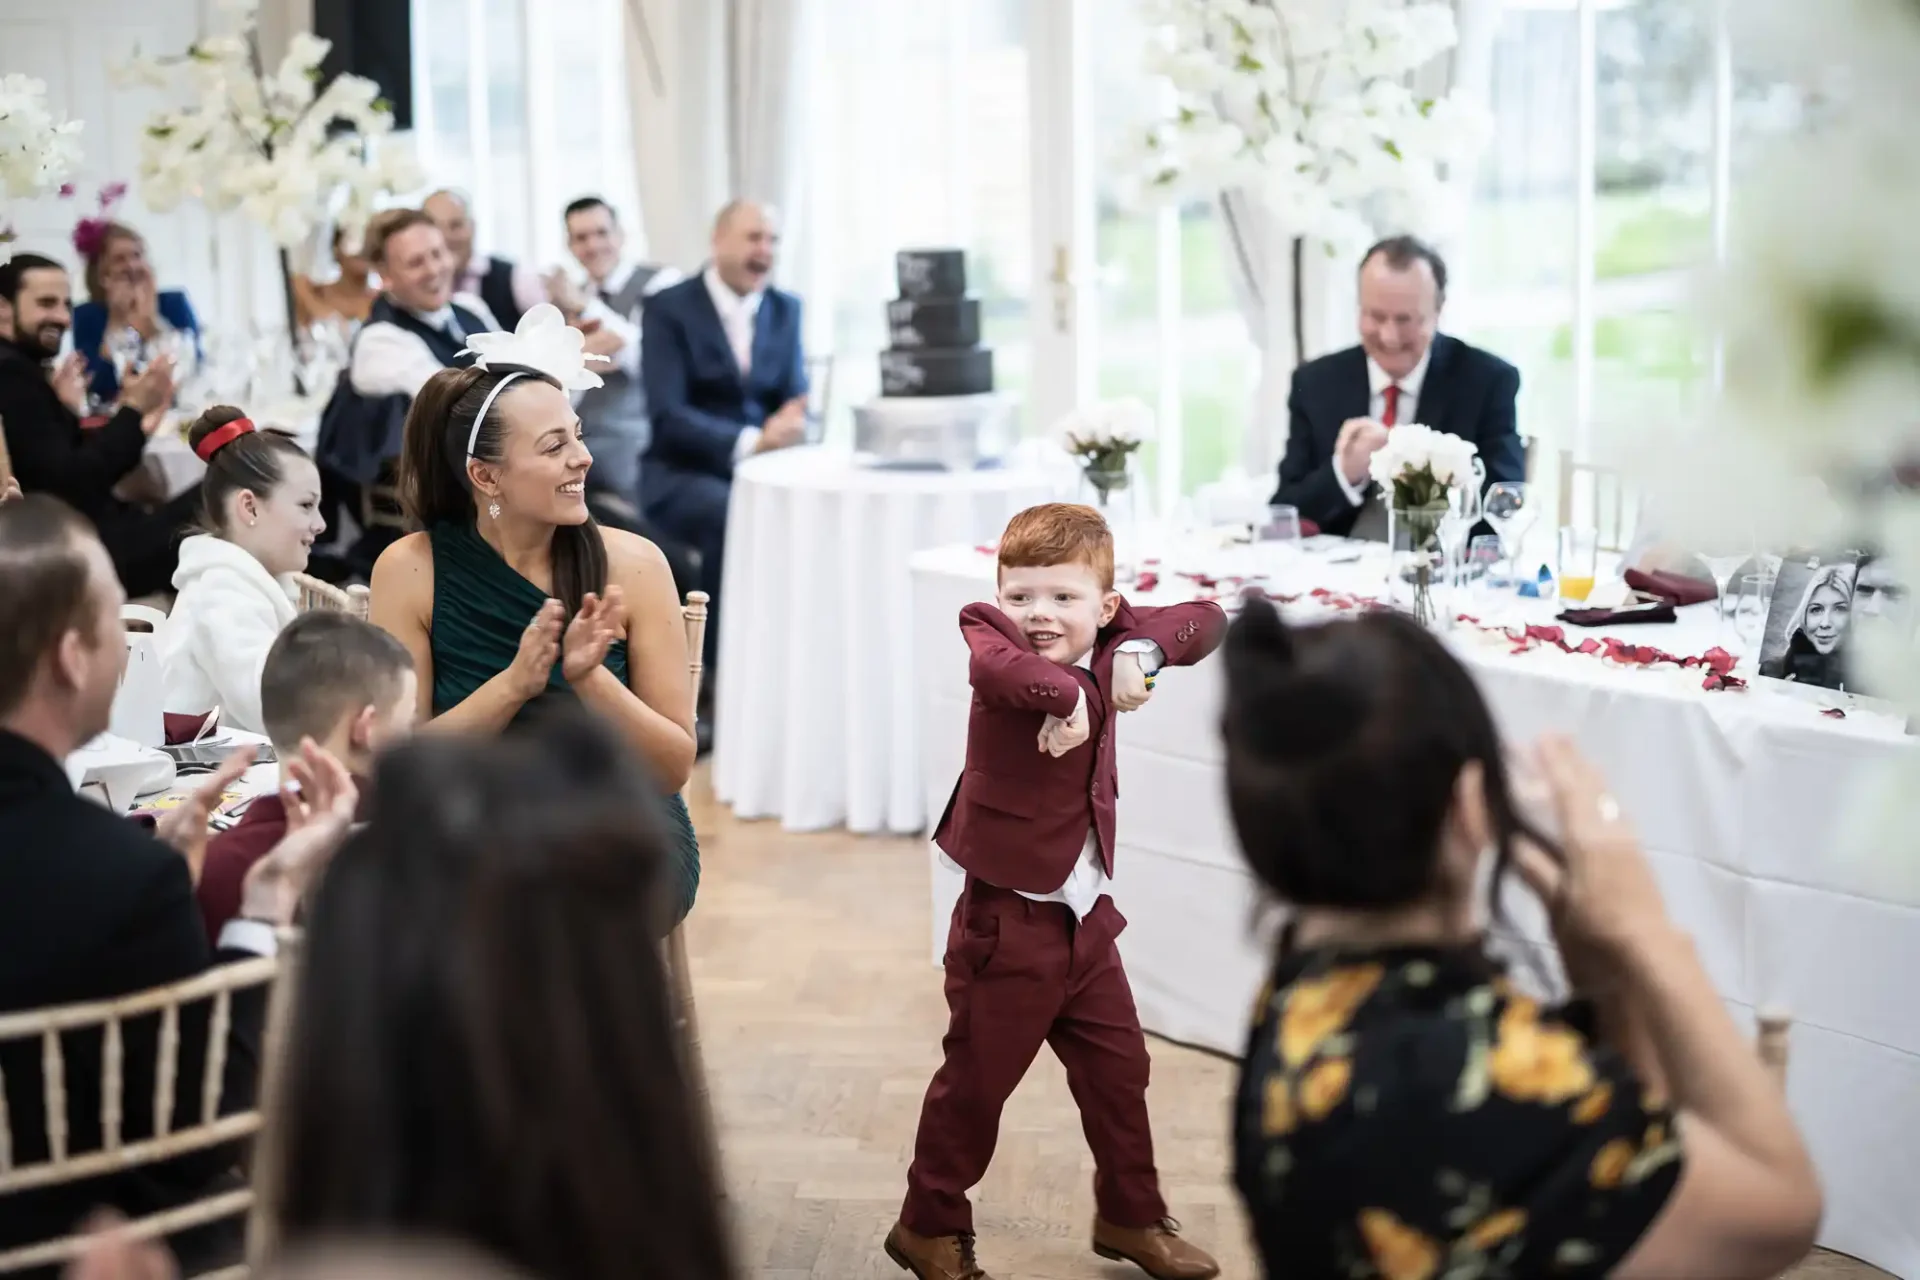 A young boy in a red suit playfully dances at a wedding reception, surrounded by applauding guests.